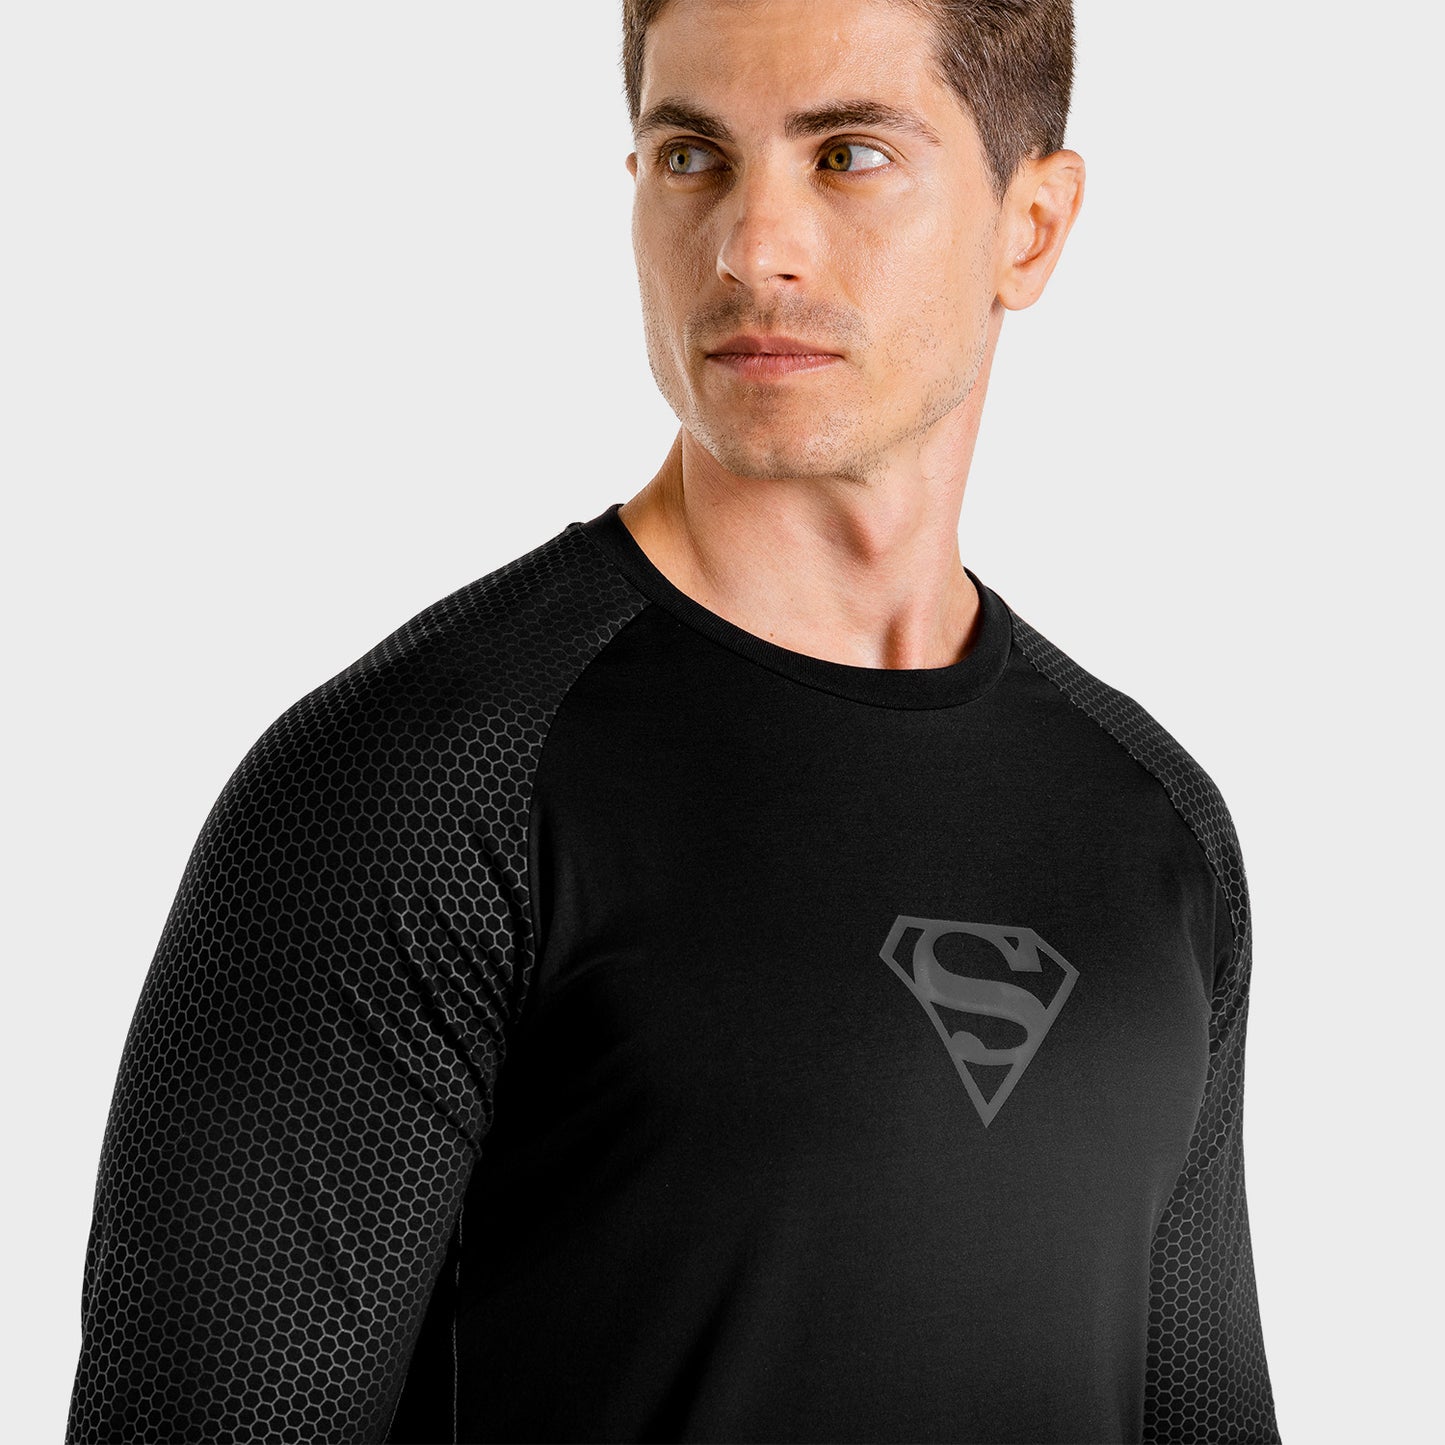 squatwolf-workout-shirts-for-men-superman-gym-long-sleeves-tee-black-gym-wear